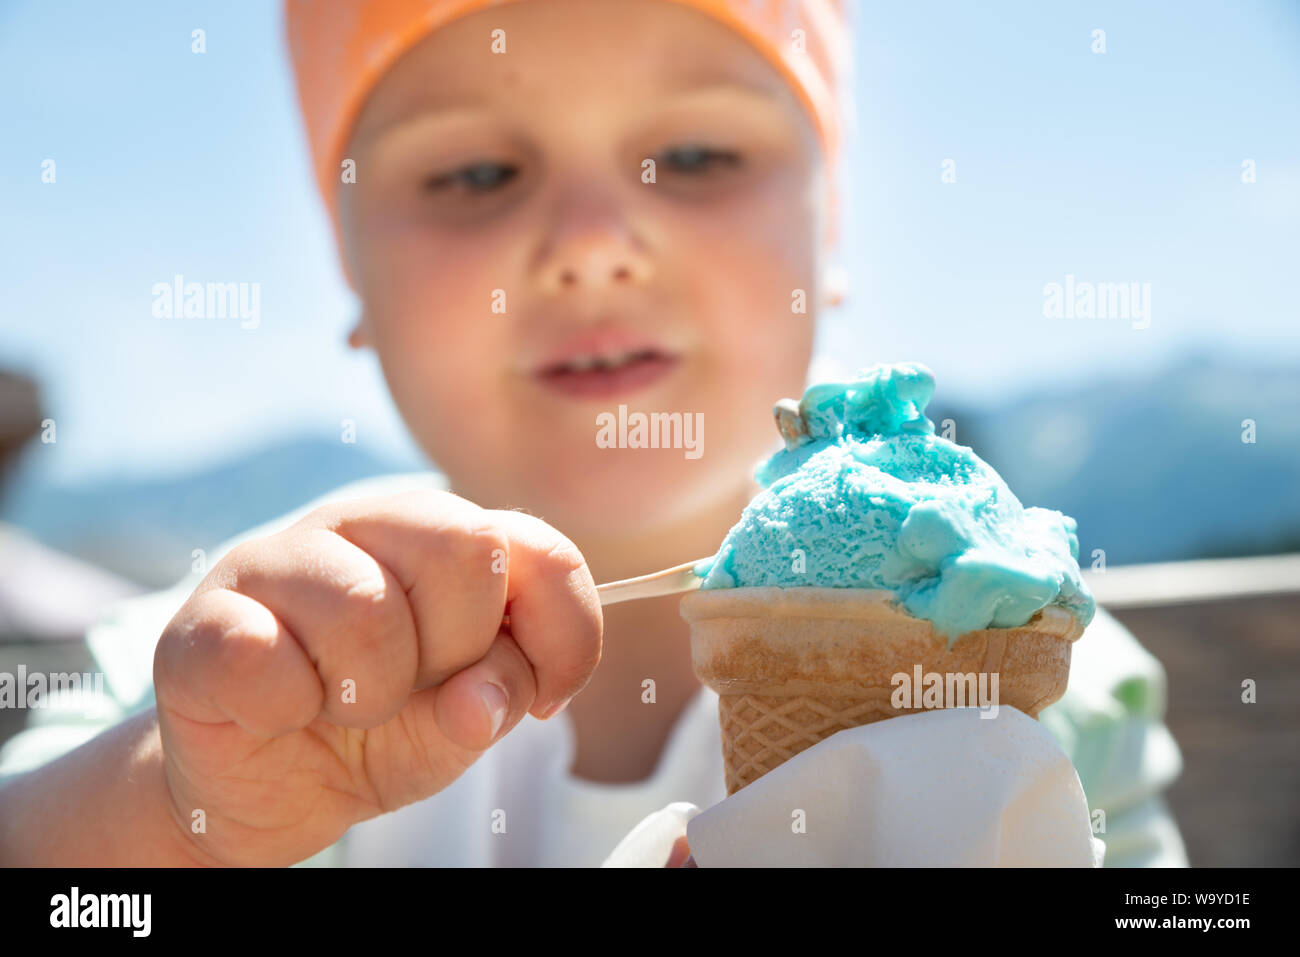 Little Girl Eating Ice Cream In Summer On A Hot Day Stock Photo